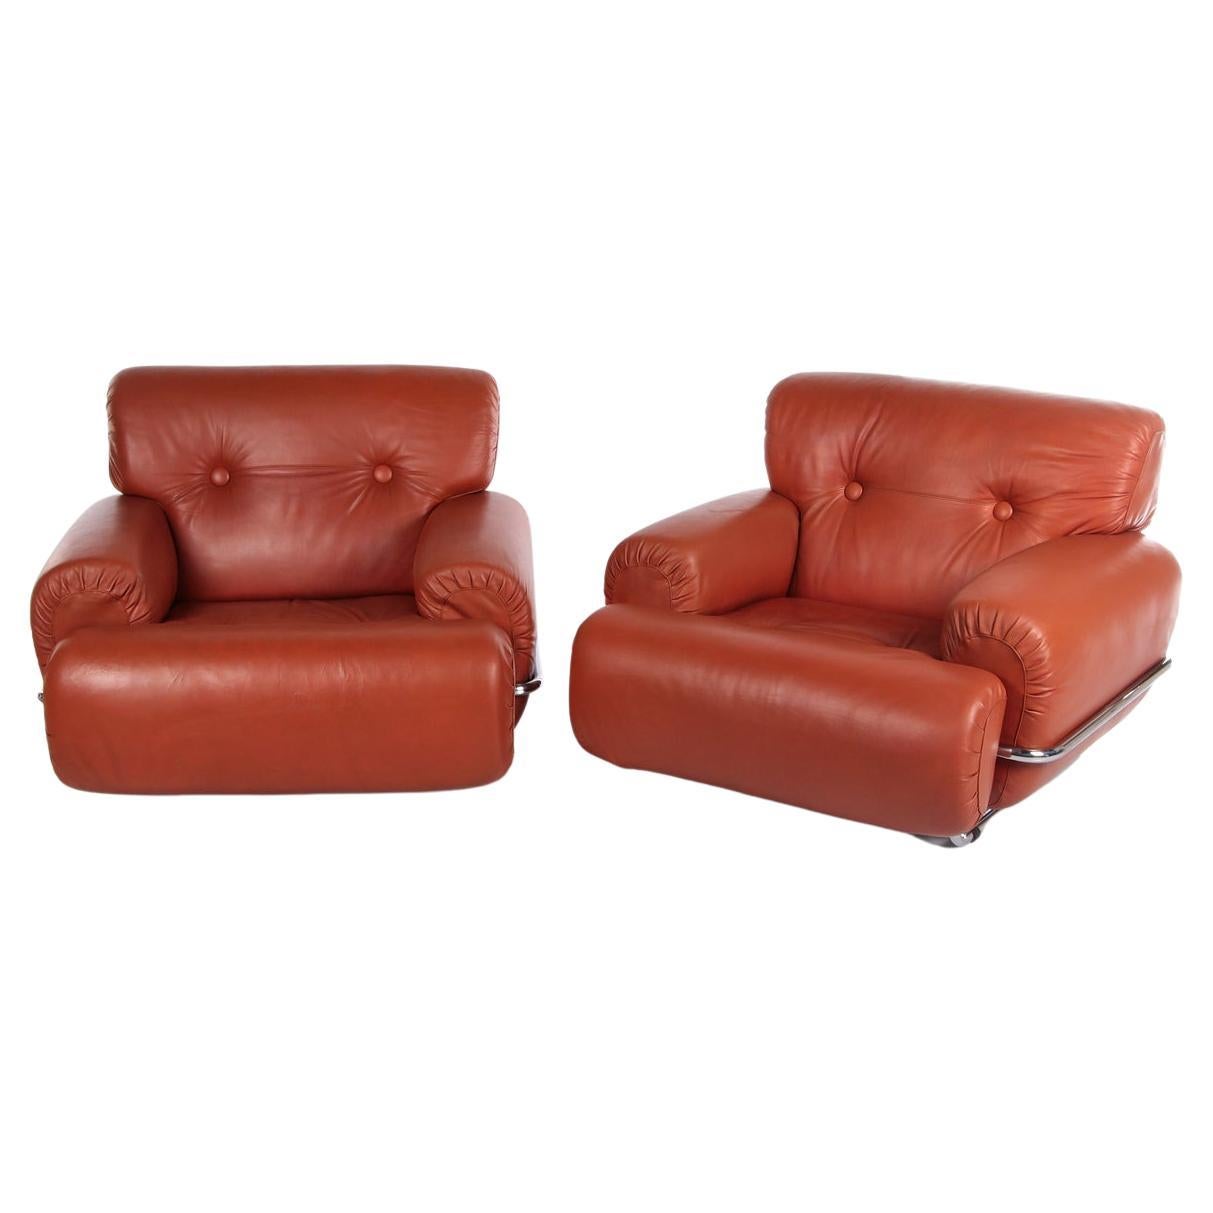 Vintage Leather Armchairs Guido Faleschini Style - Set of 2 For Sale